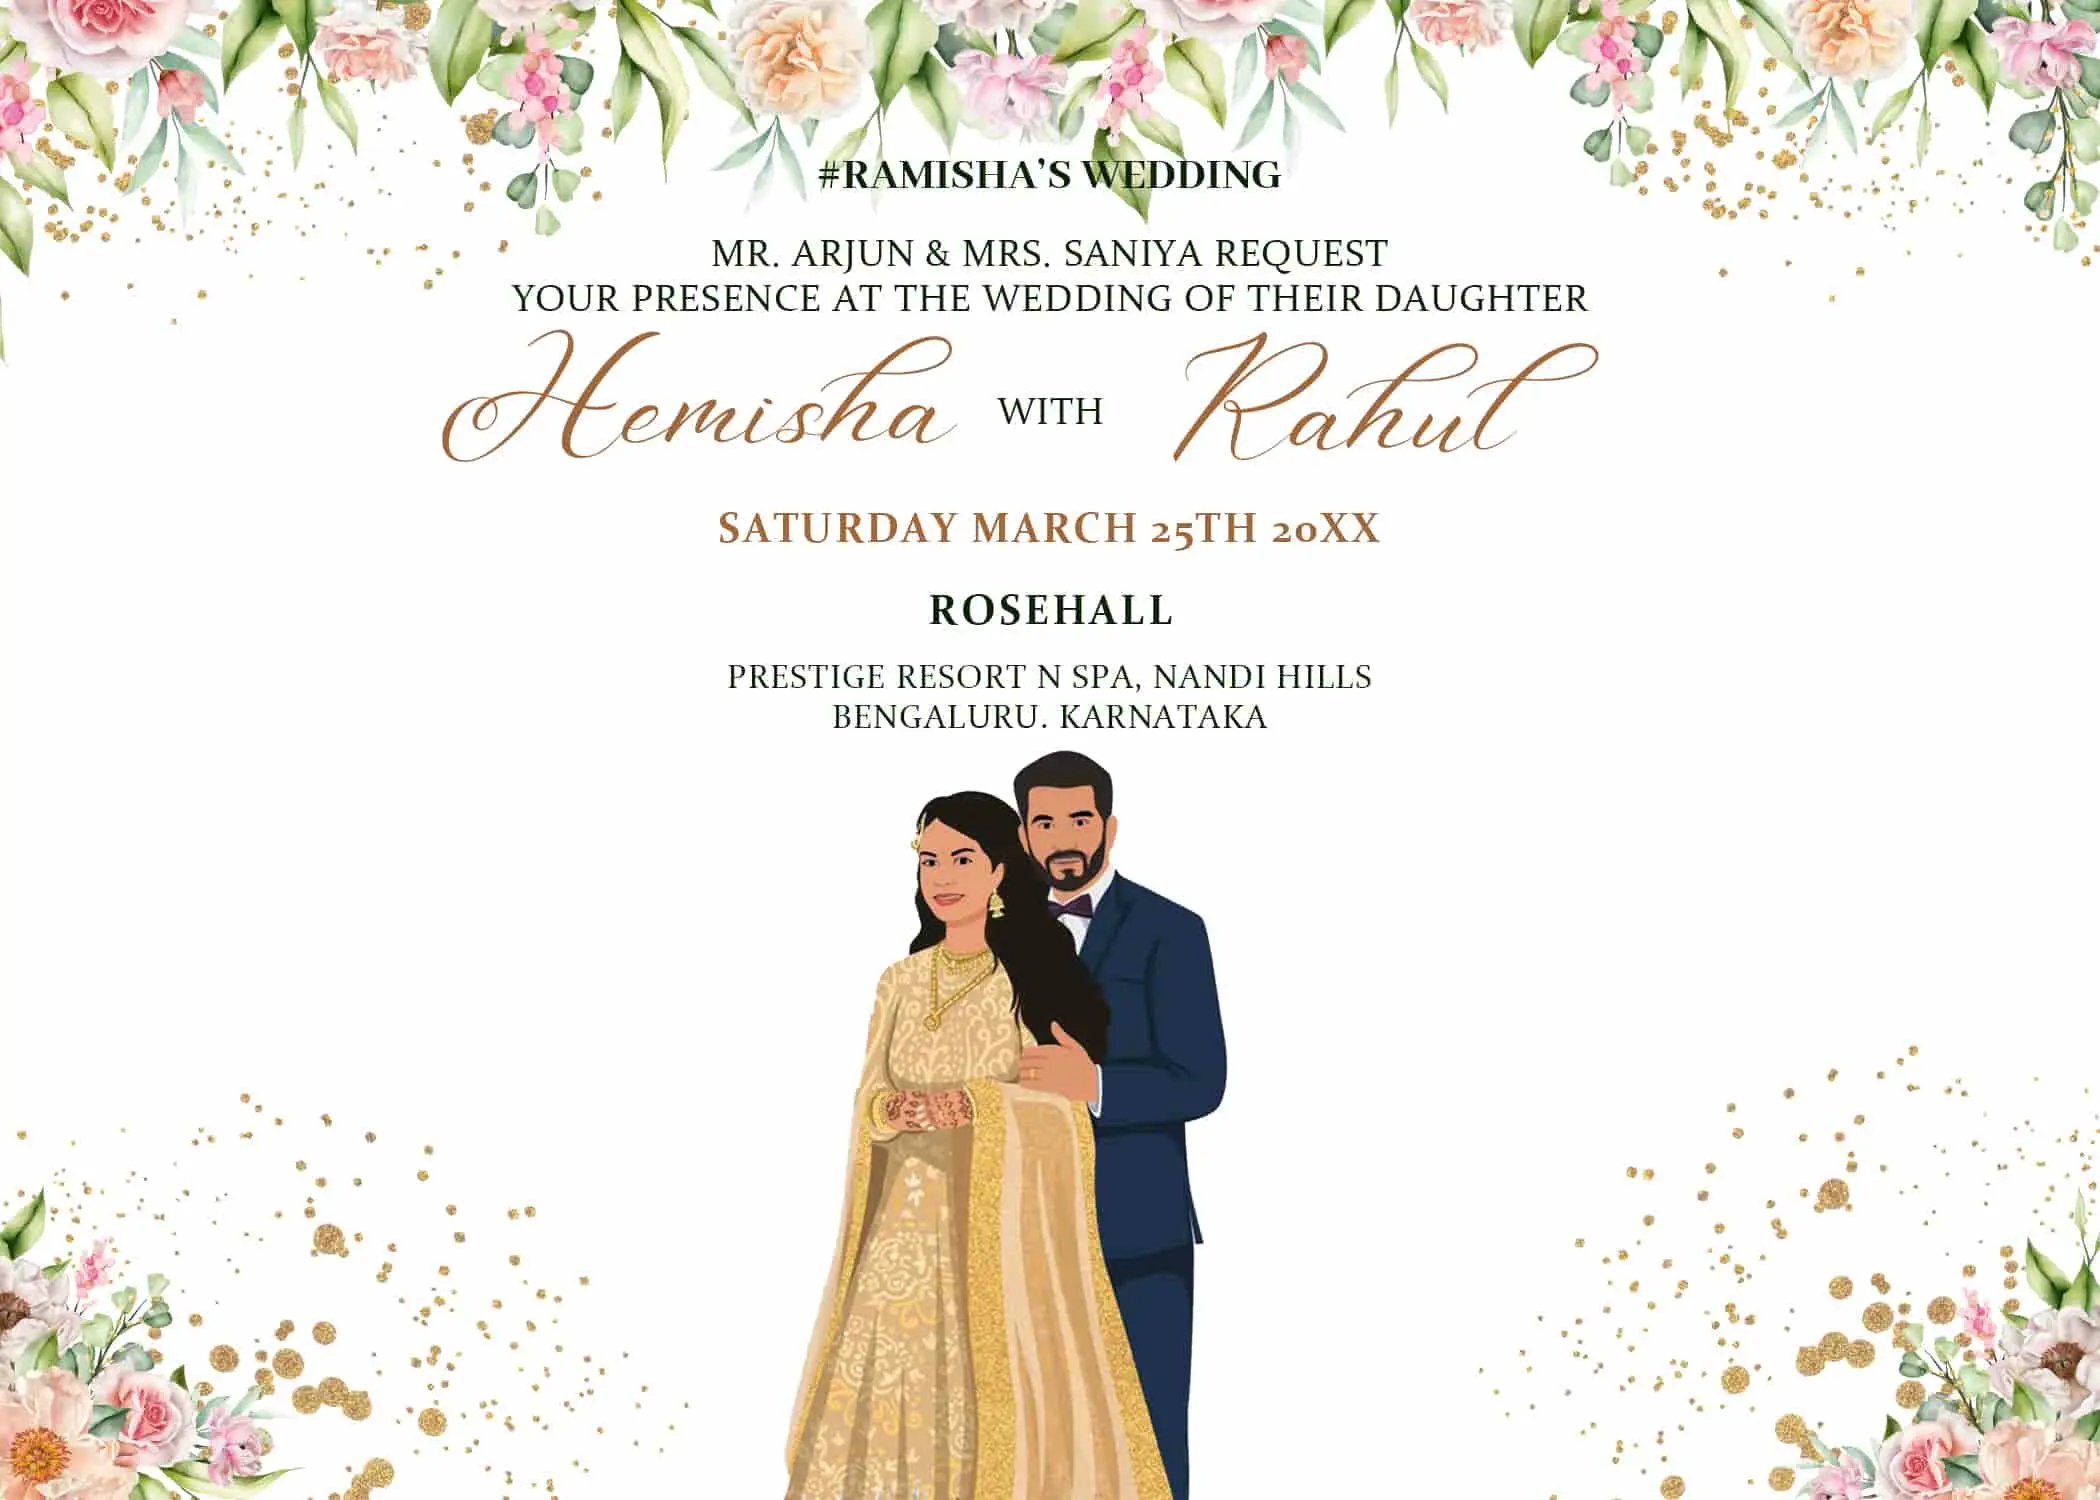 Online Invitation to Wedding: A Modern Approach to Celebrations